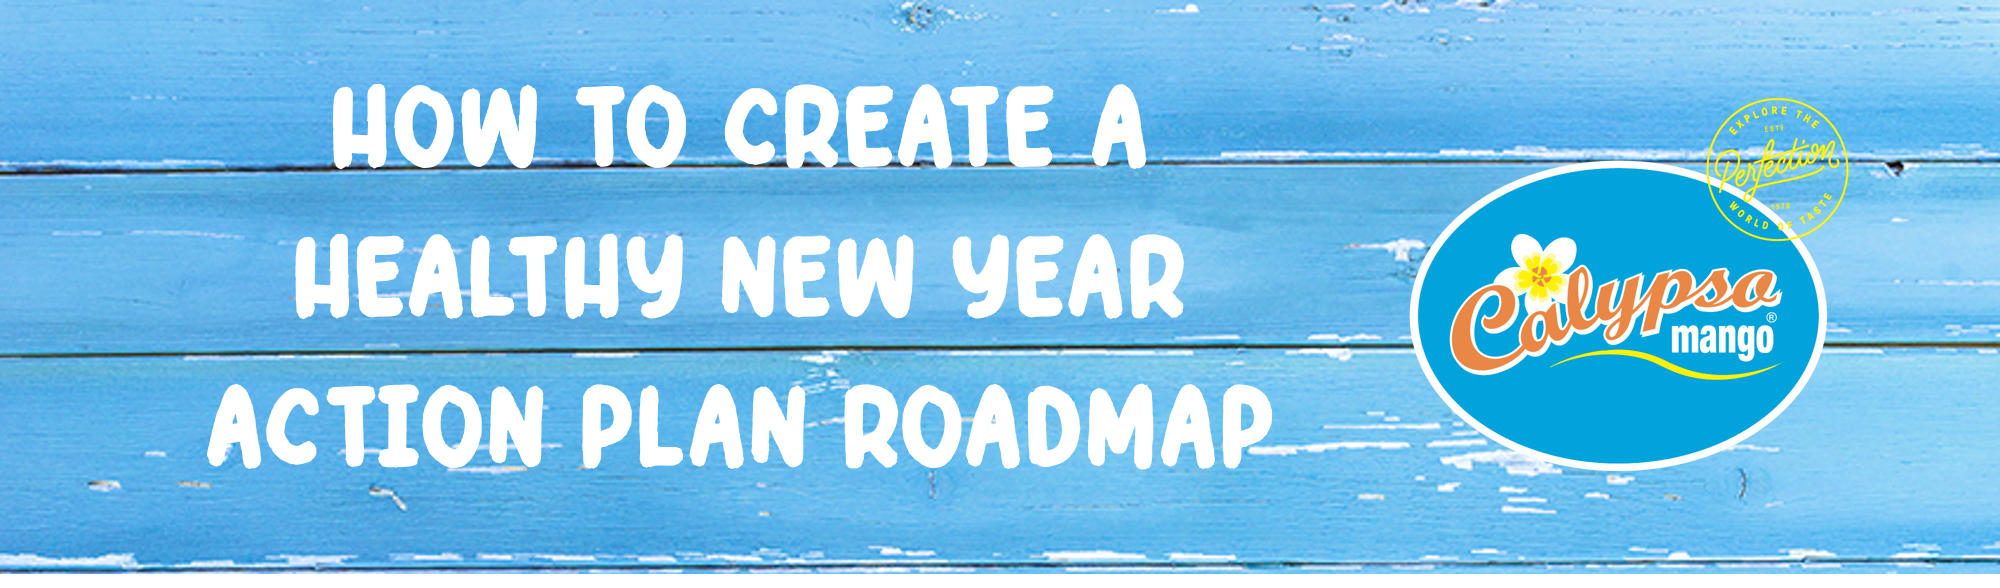 How to create a healthy new year action plan roadmap cover